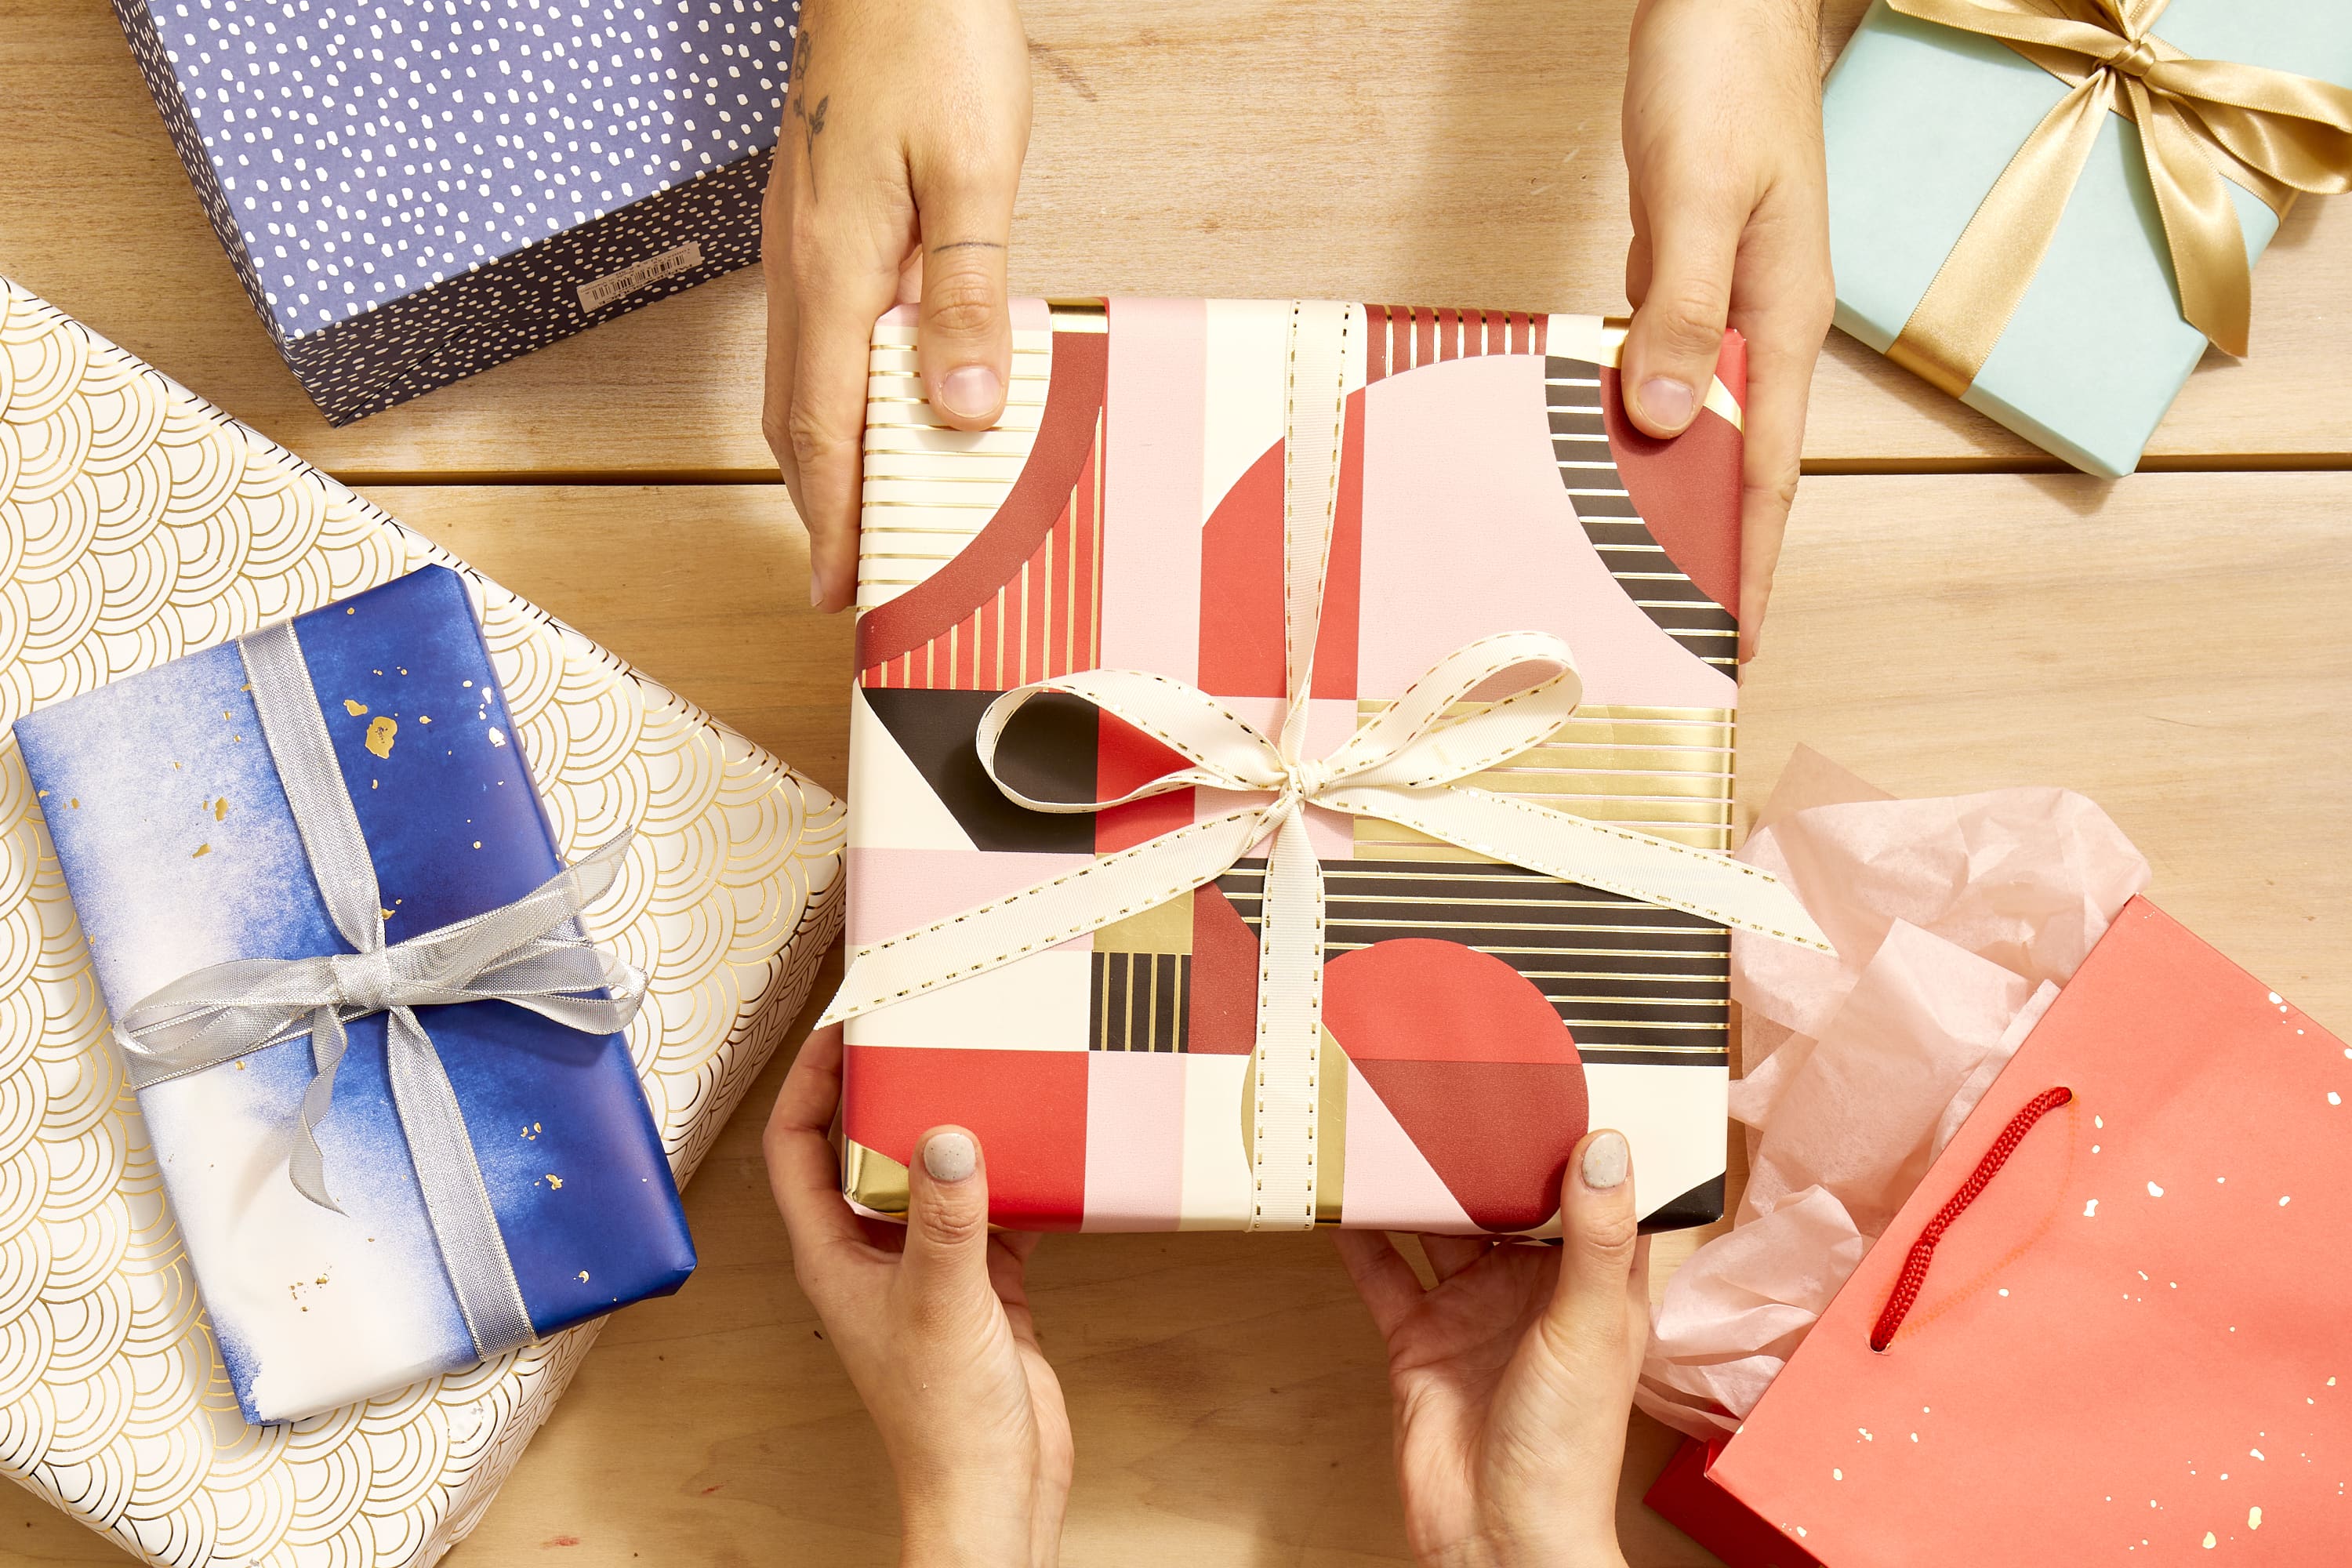 5 Gift Exchange Games - Party Ideas for Real People